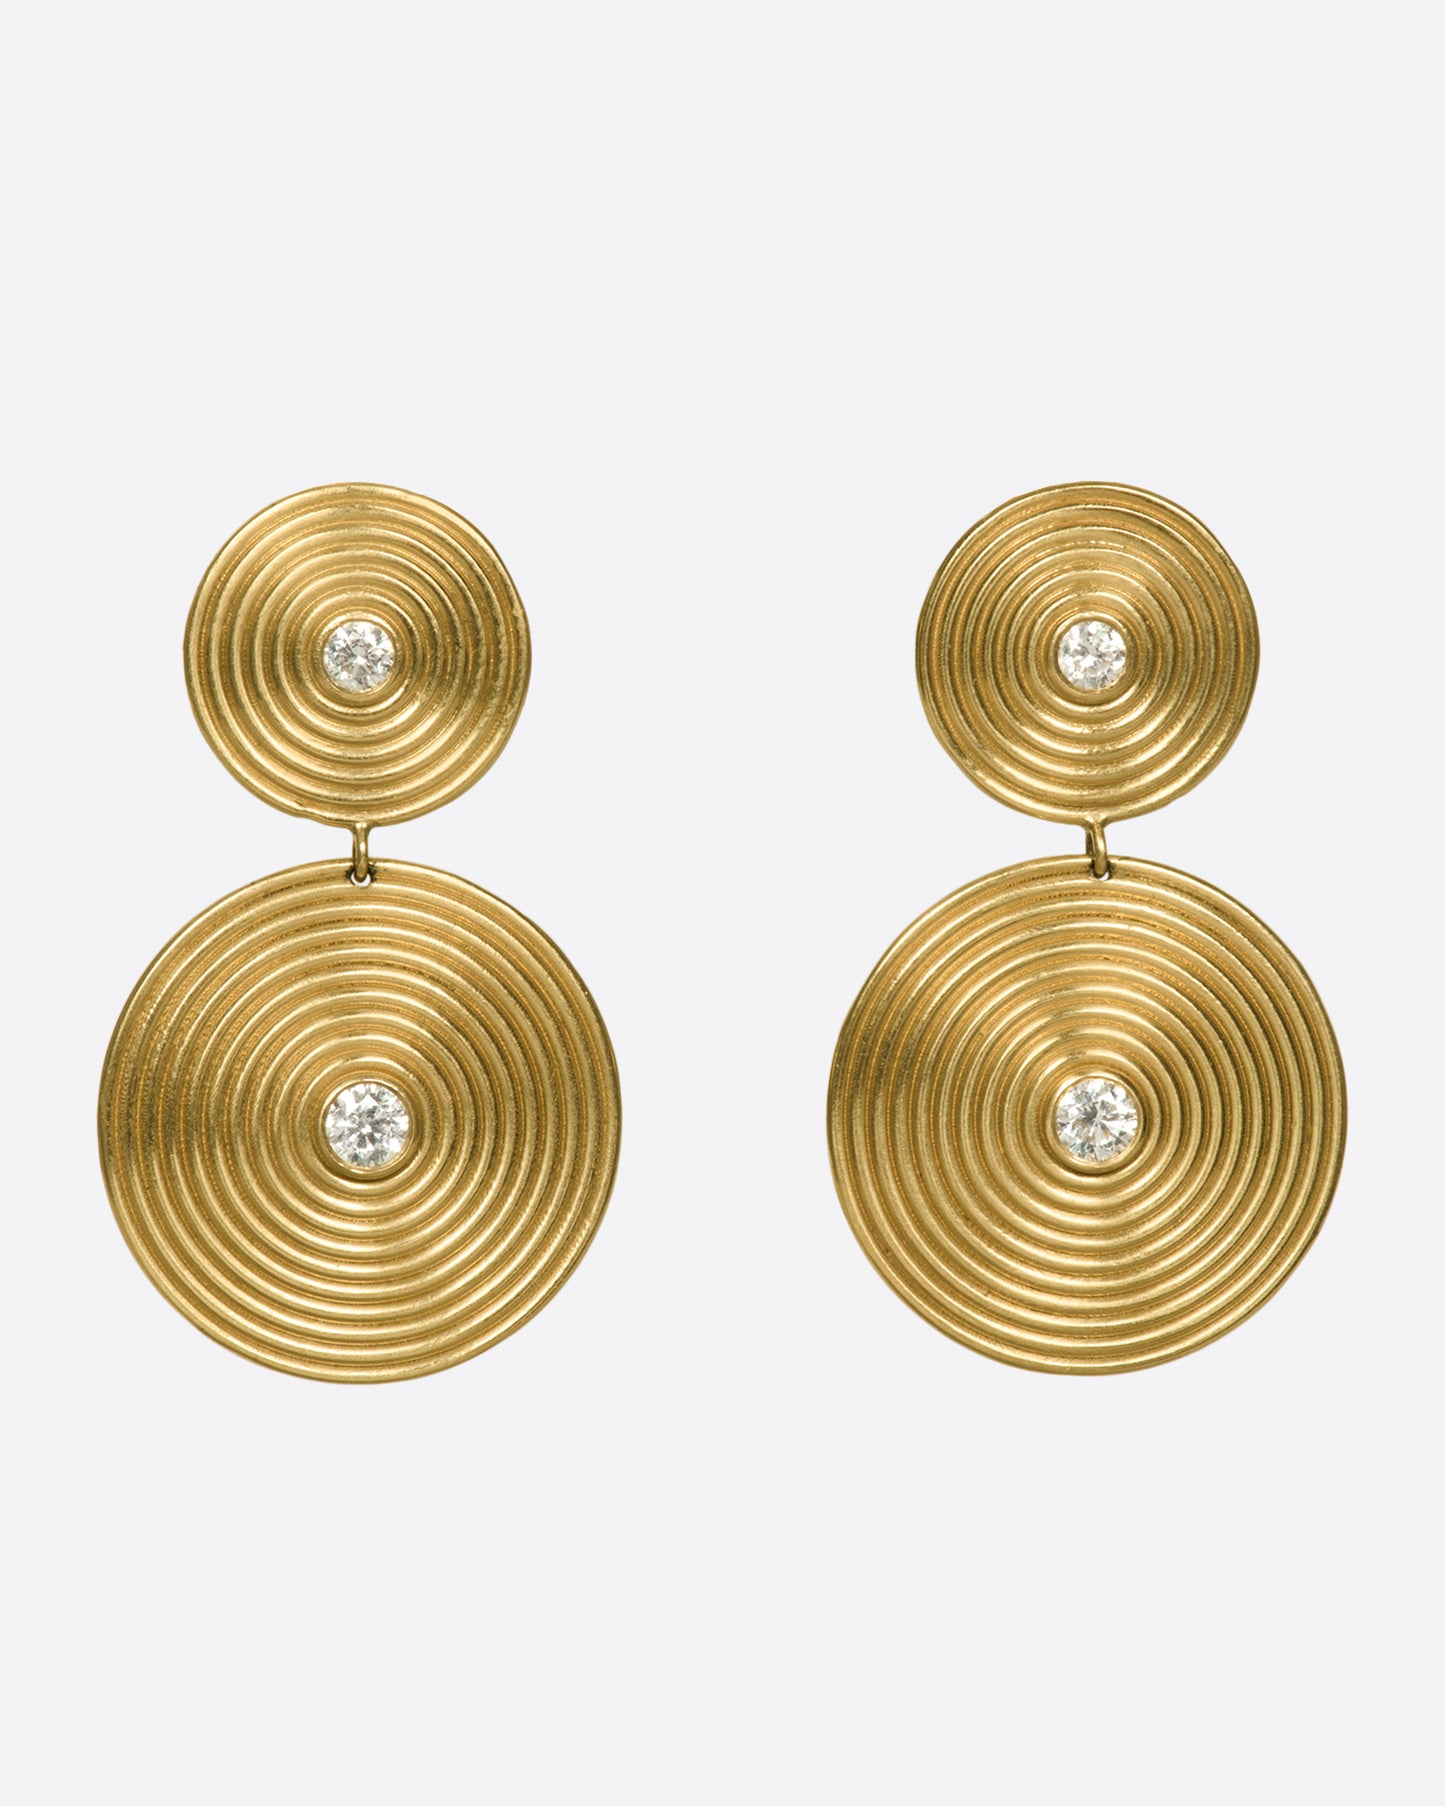 14k gold disc drops, each punctuated with two white diamonds. The concentric circles are elegant symbols of growth and change.